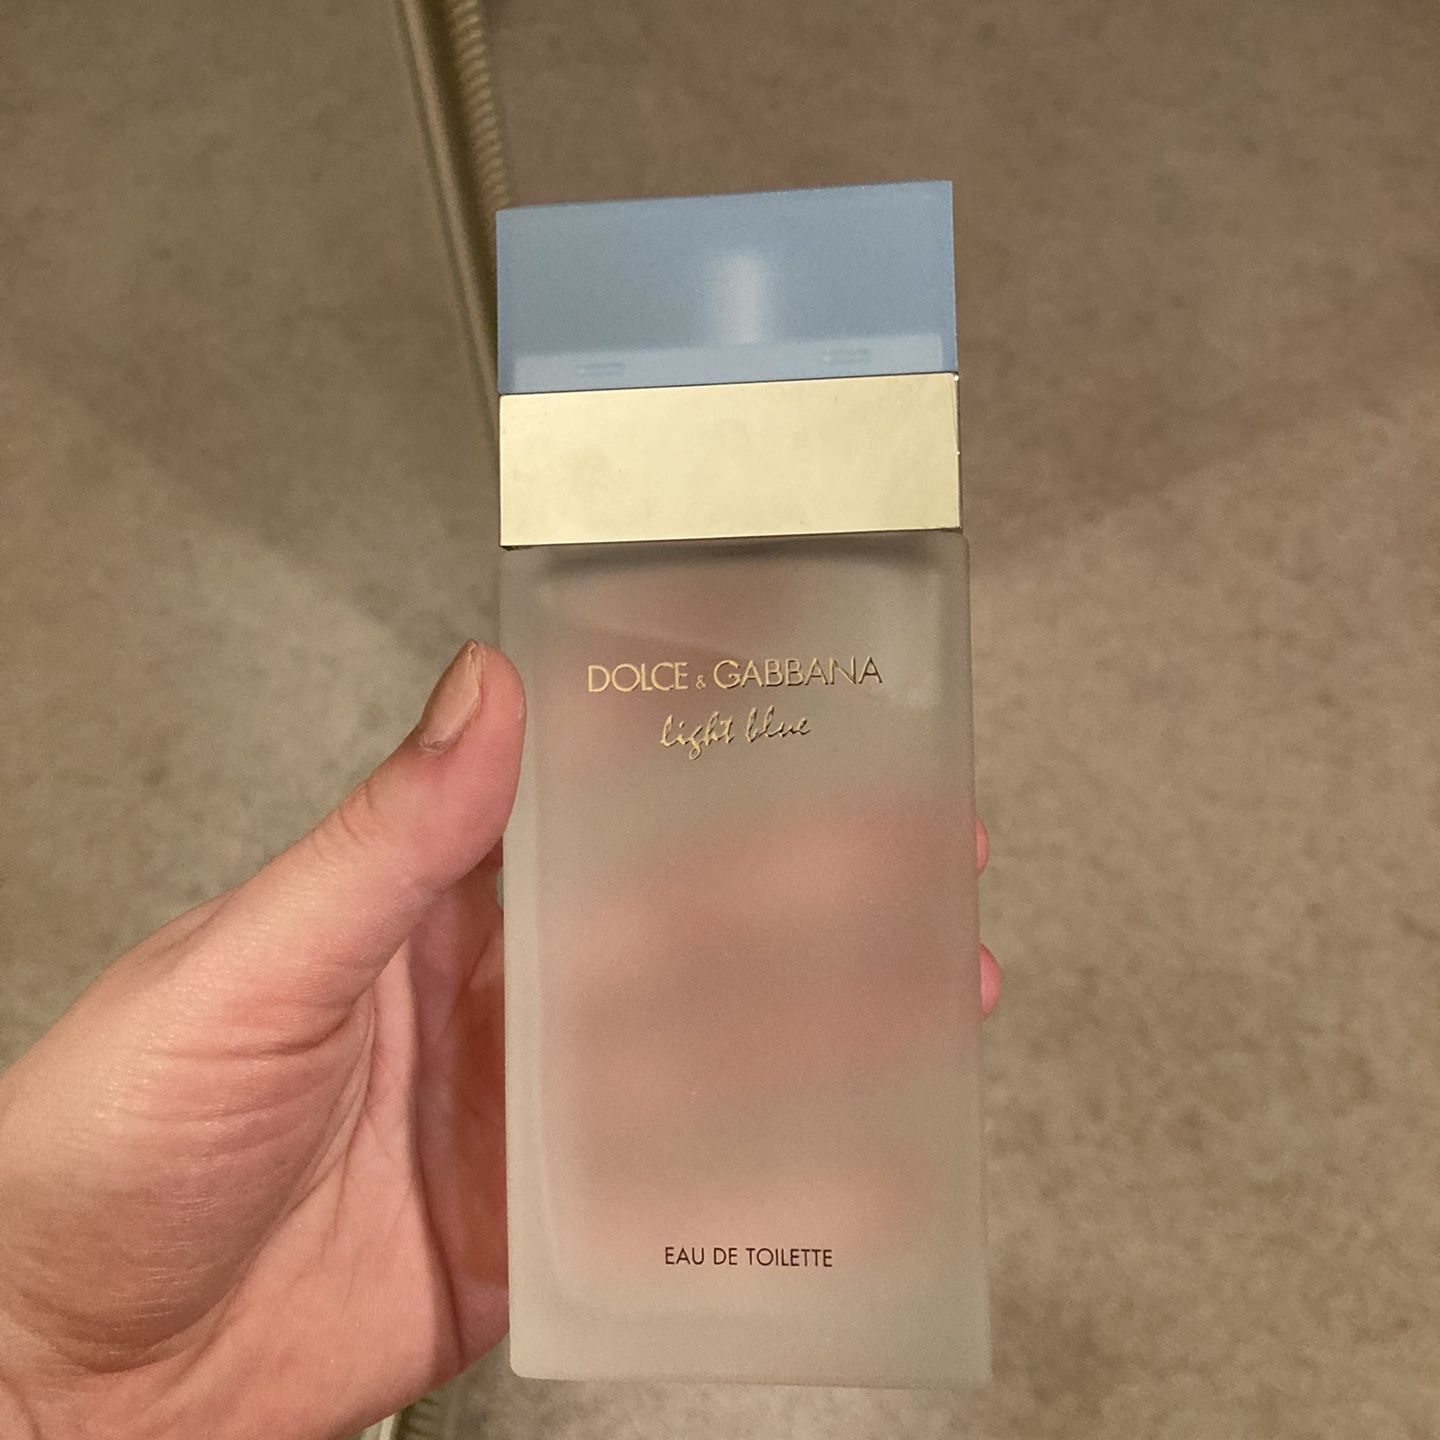 Chanel 505 perfume for Sale in San Antonio, TX - OfferUp